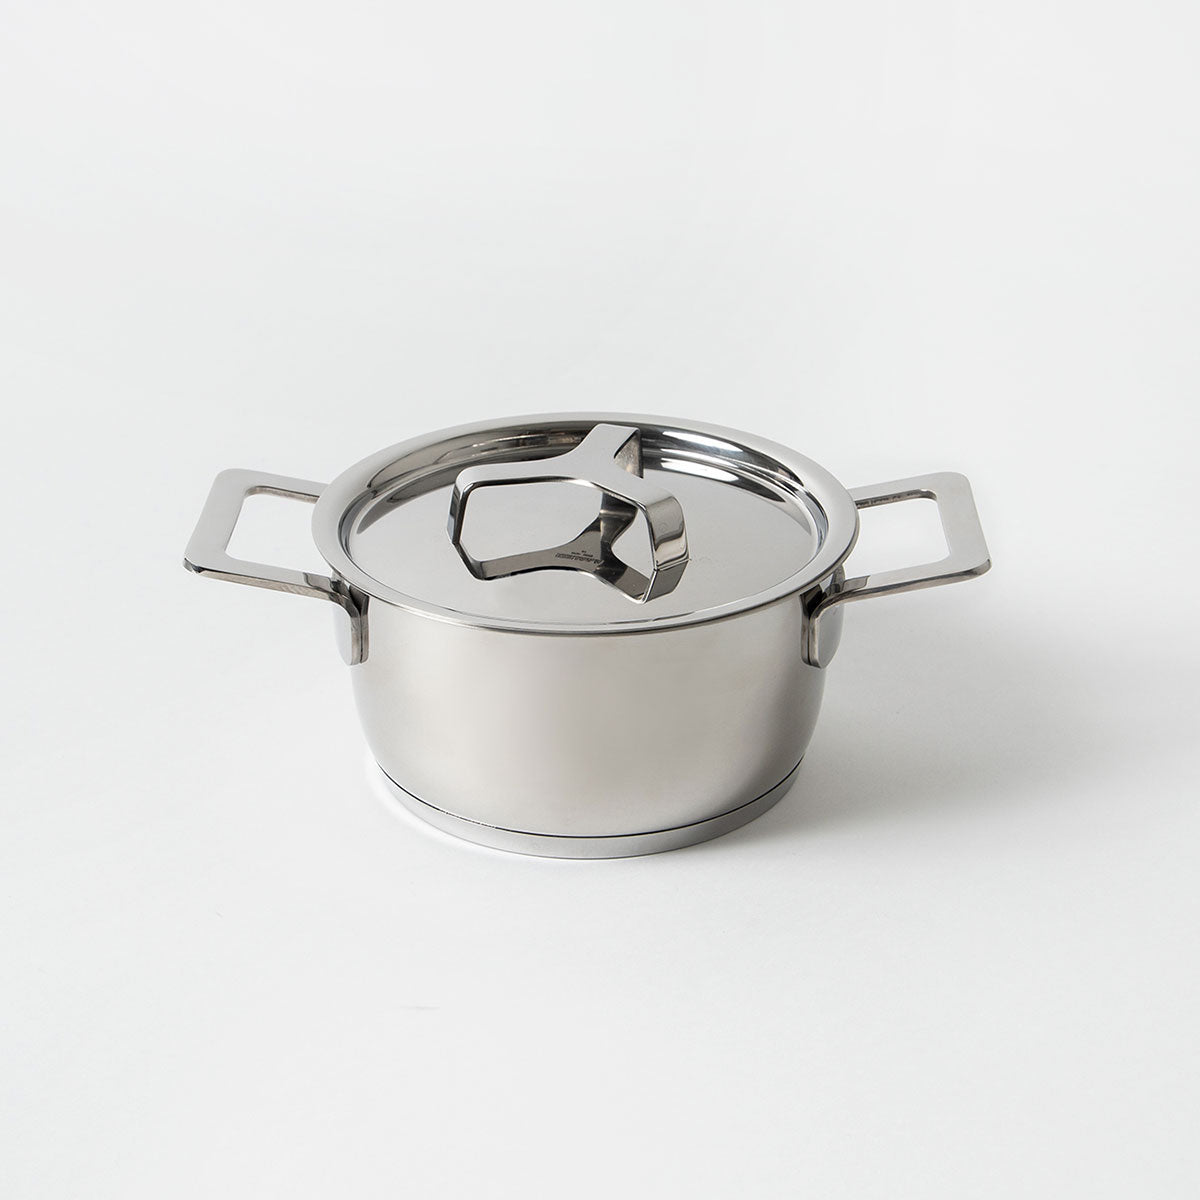 ALESSI(アレッシィ) Pots&Pans キャセロール with two handles 16cm 